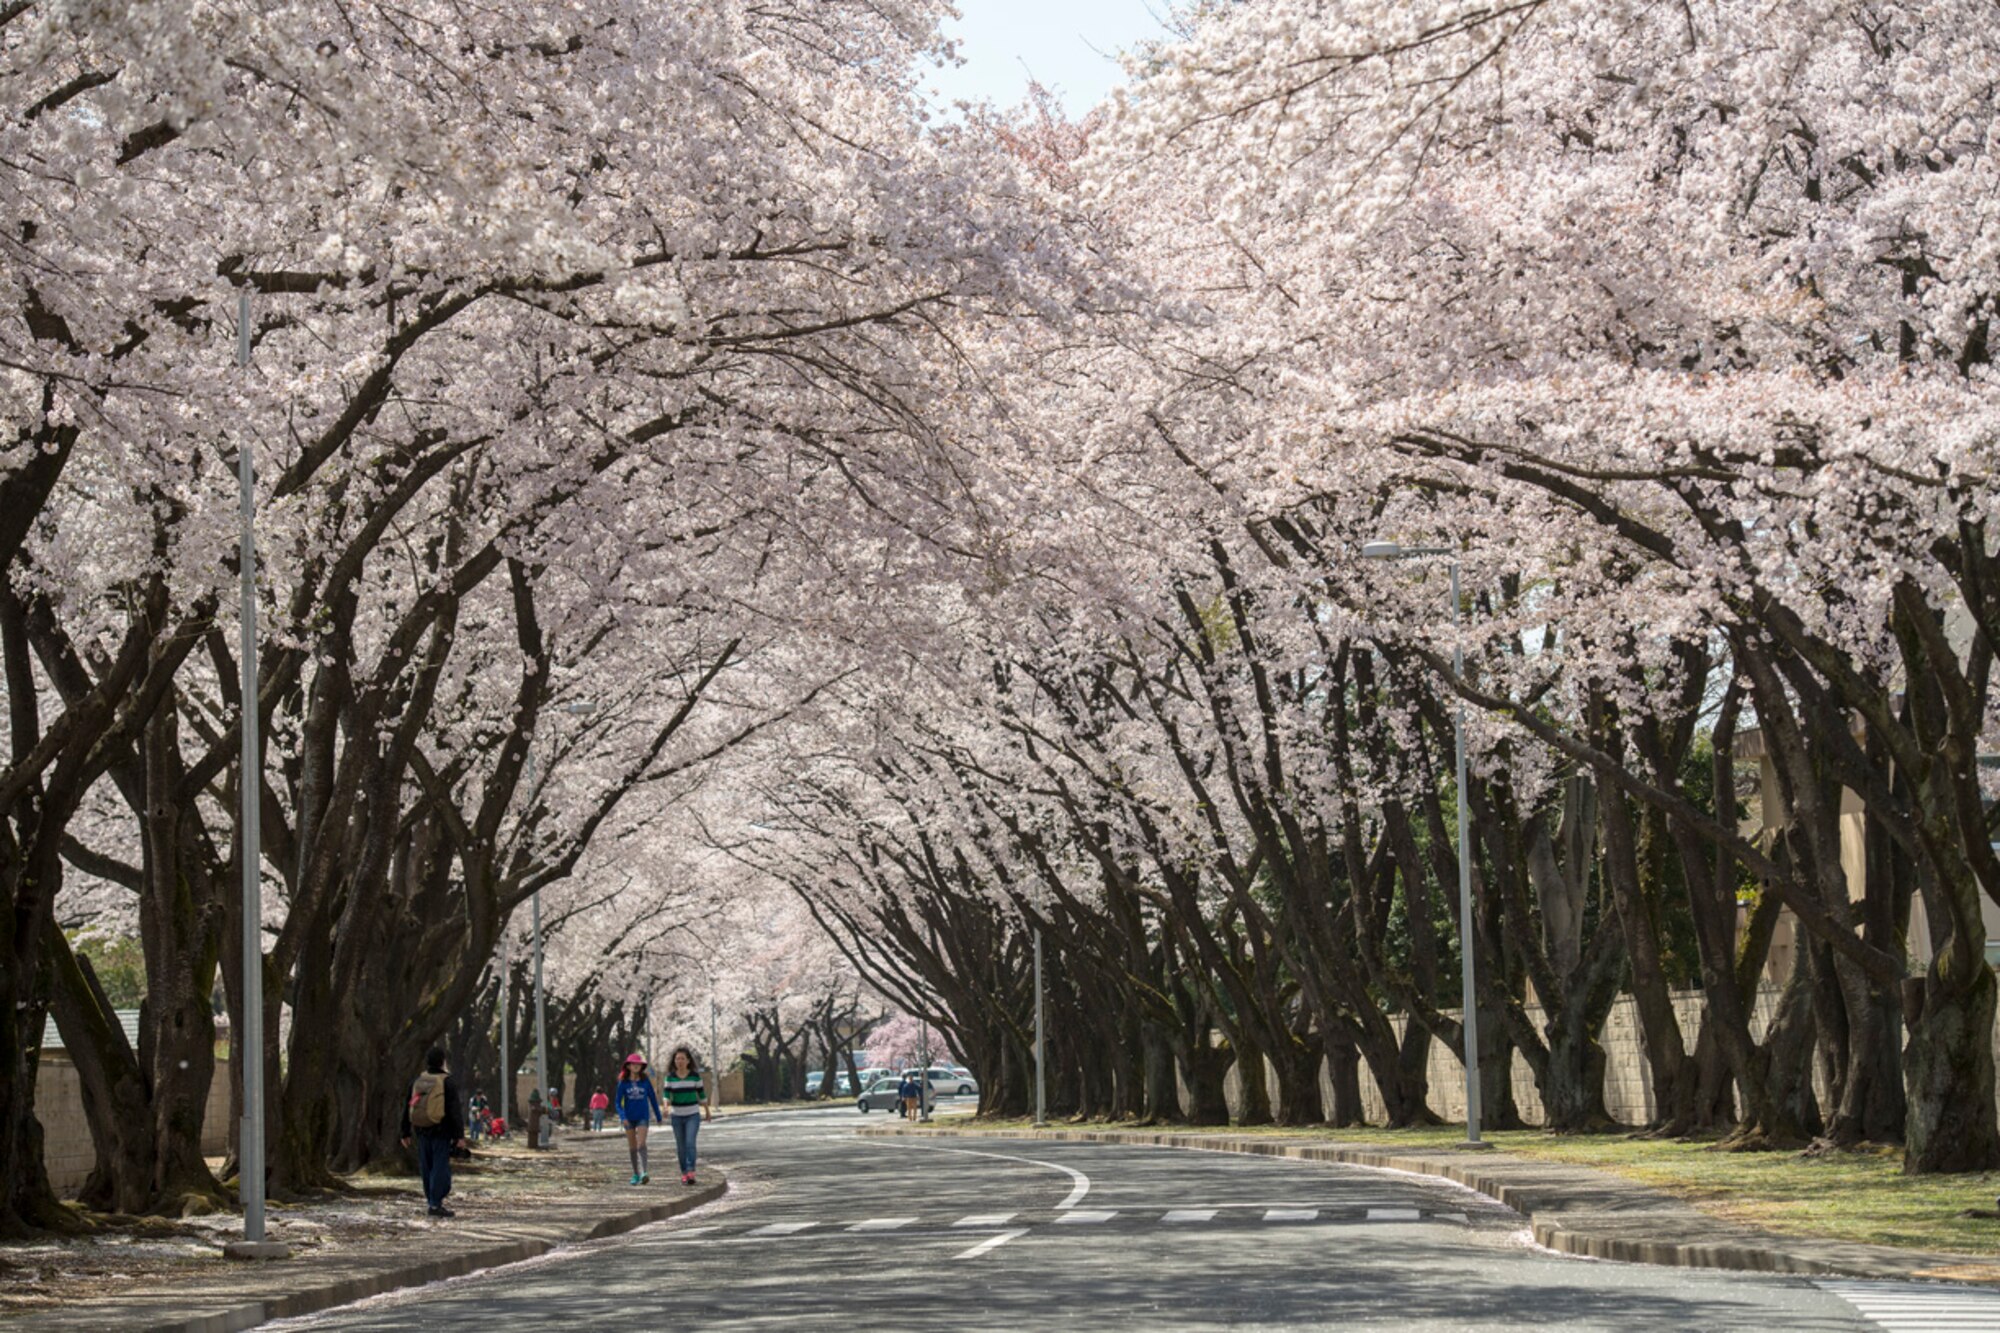 Cherry blossoms are in full bloom along McGuire Avenue at Yokota Air Base, Japan, March 30, 2018